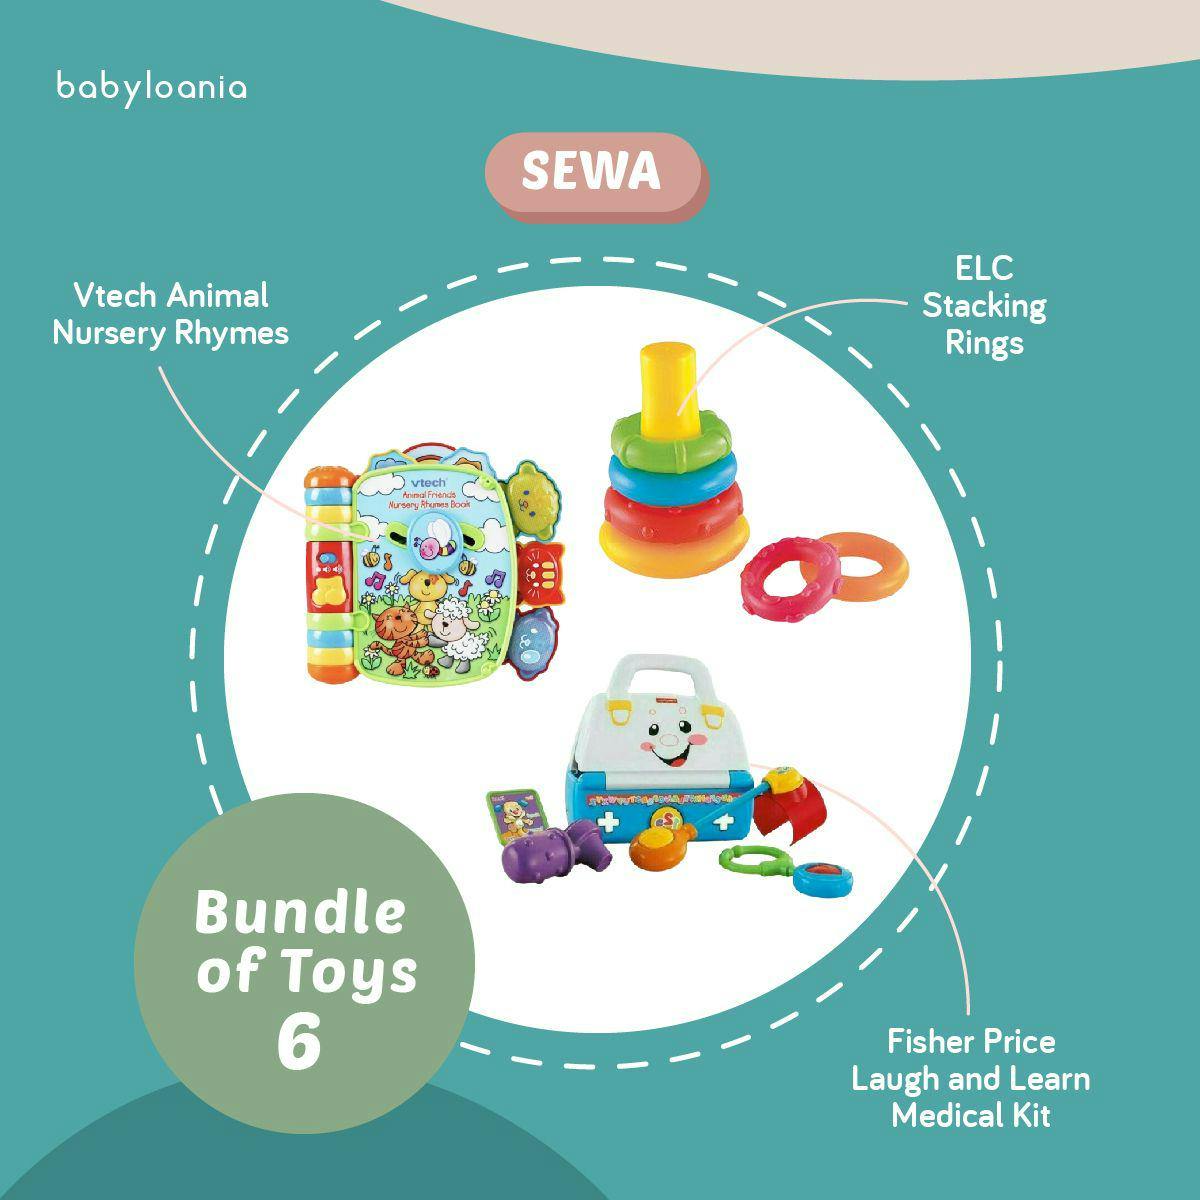 of Toys 6 (Vtech Animal Nursery Rhymes + ELC Stacking Rings + Fisher Price Laugh and Learn Medical Kit)